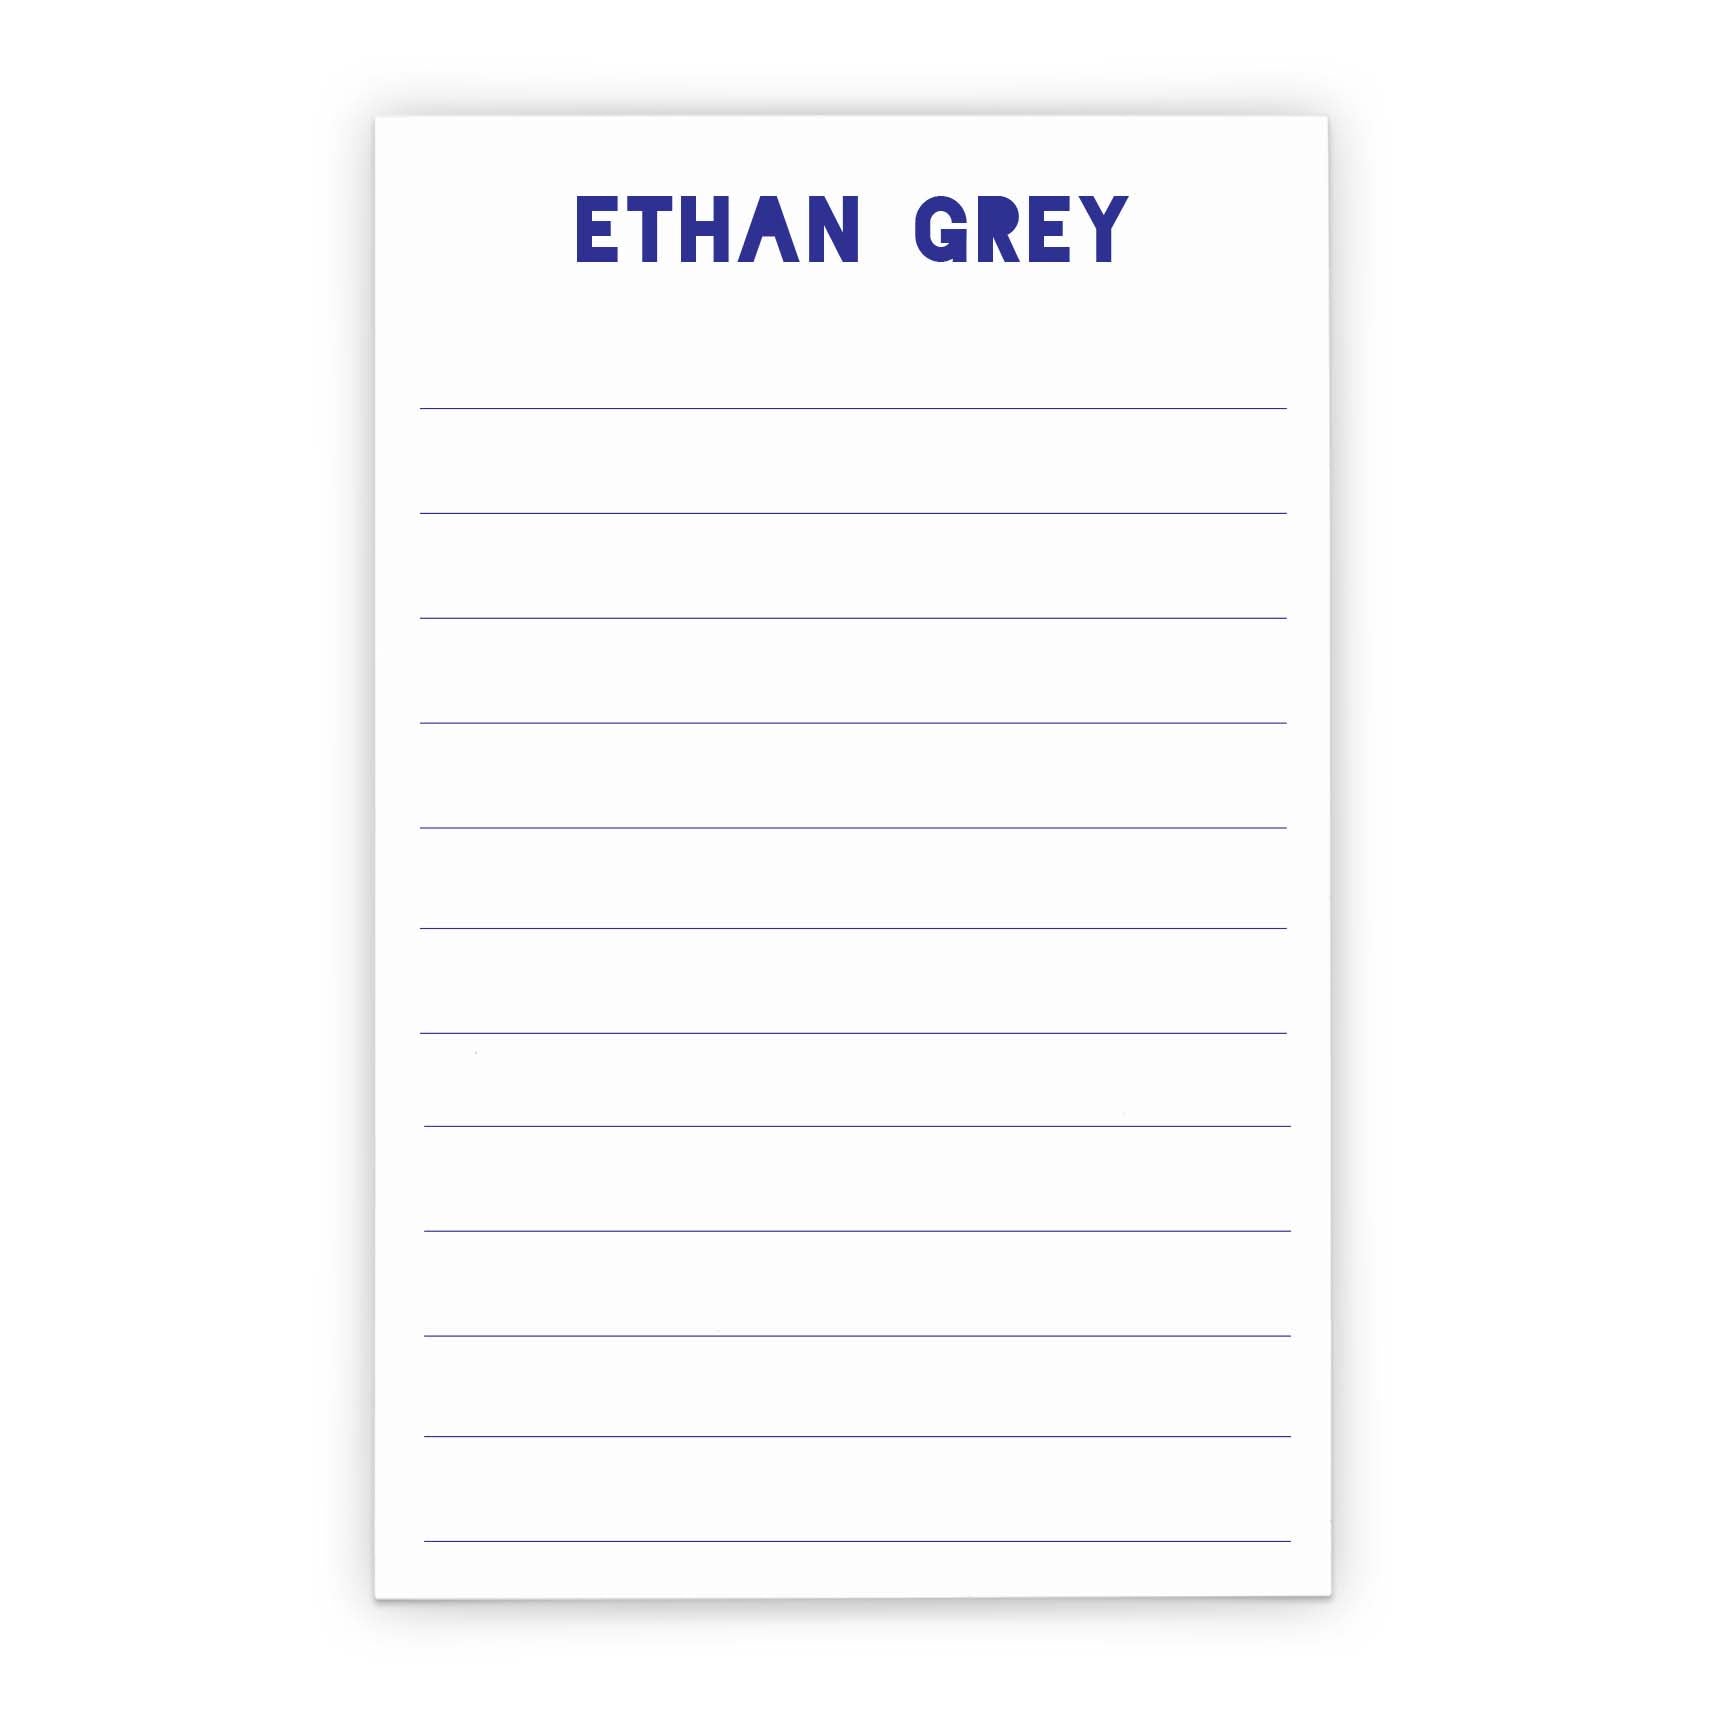 Personalized Lined Notepads